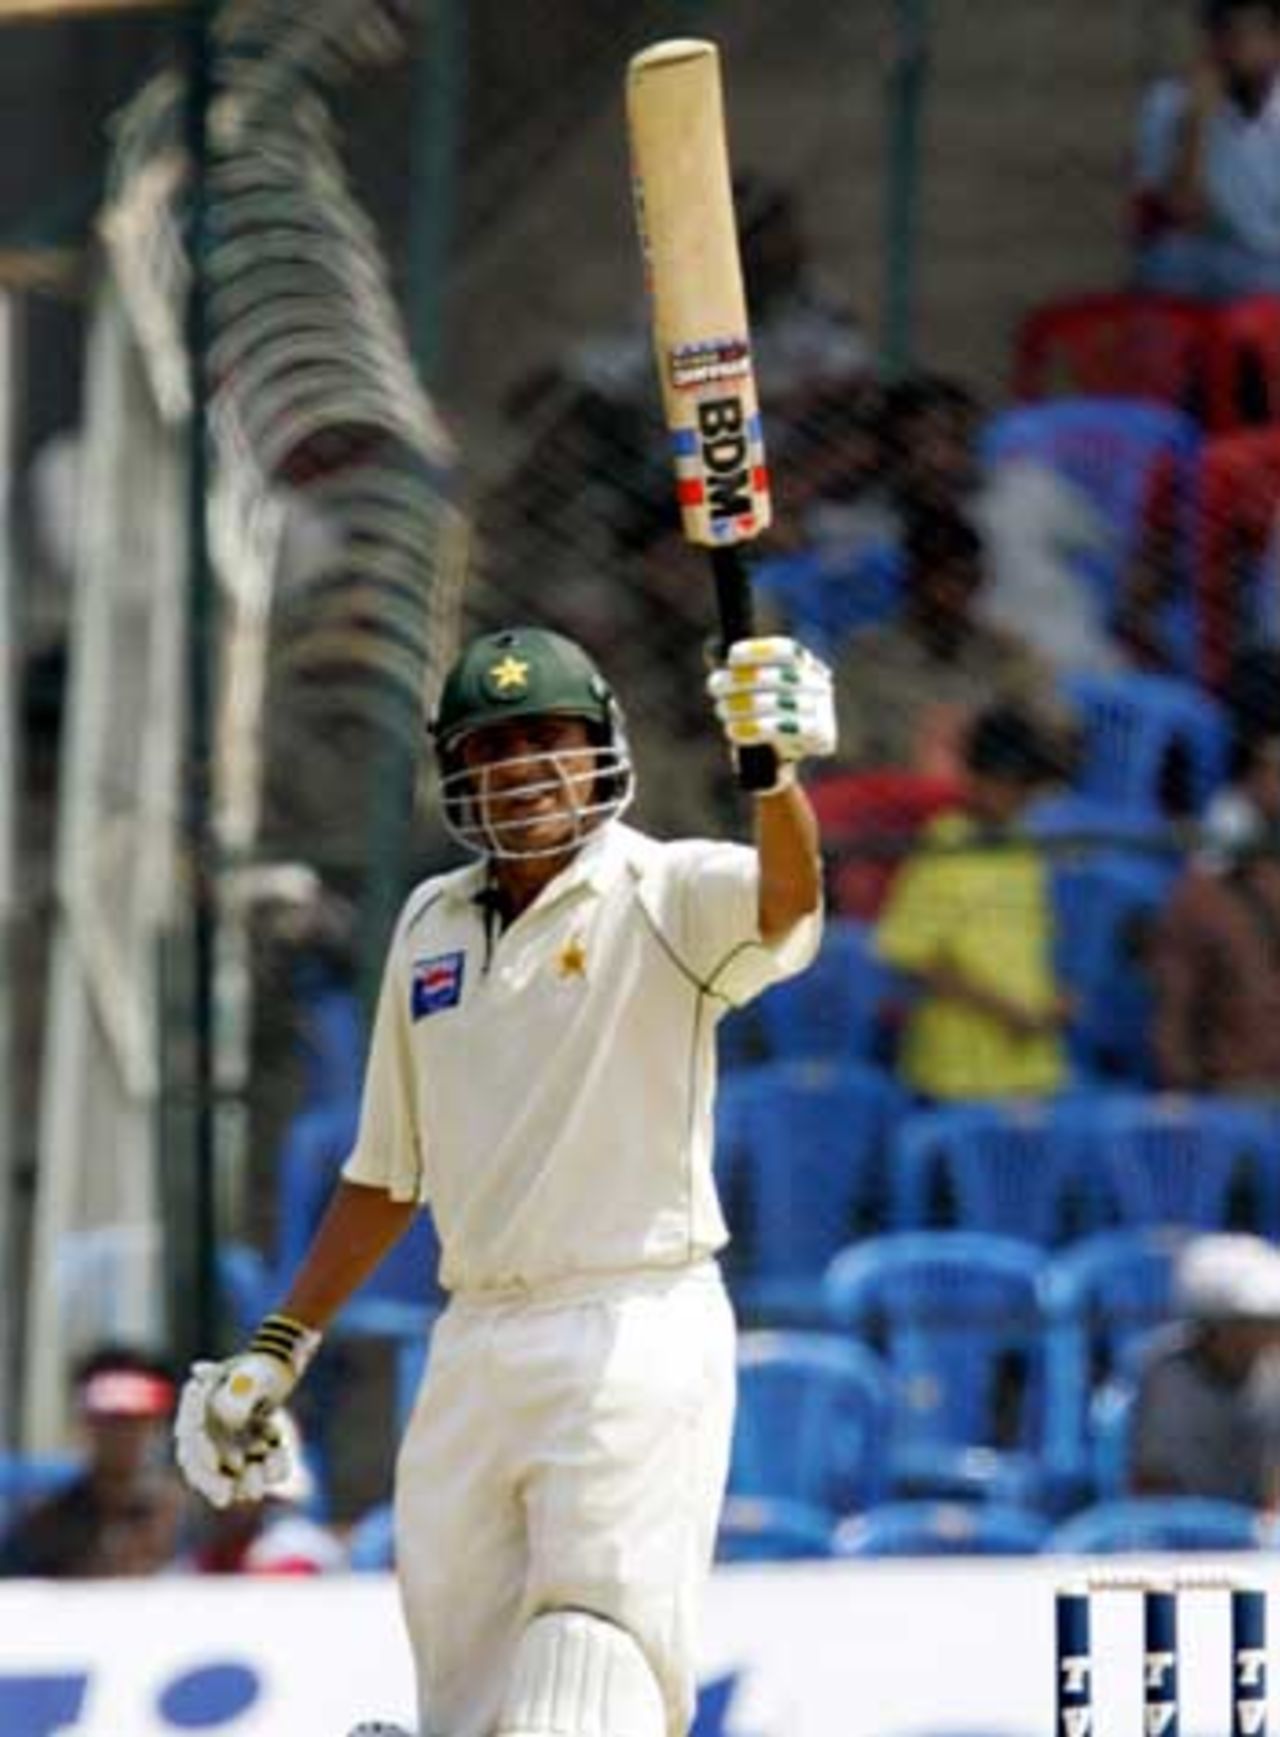 Younis Khan acknowledges the crowd's cheers, India v Pakistan, 3rd Test, Bangalore, 1st day, March 24, 2005